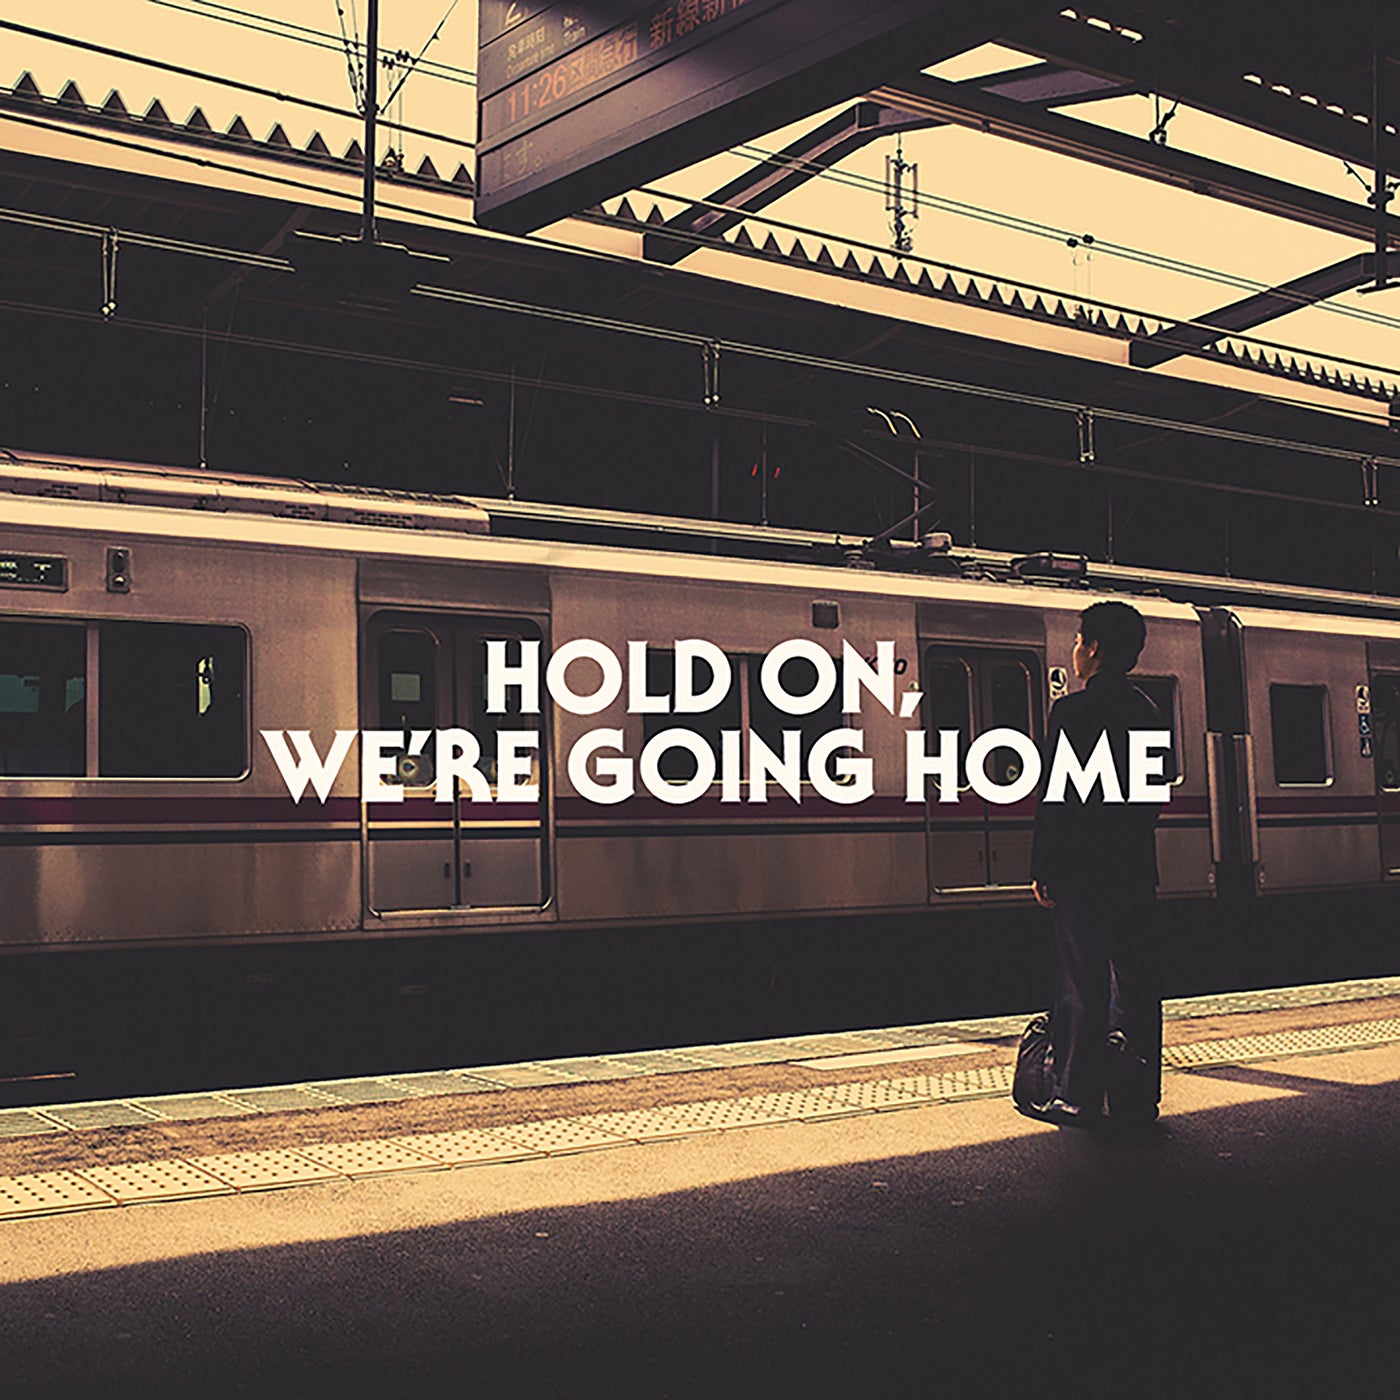 1 never going home. Go Home. Going Home. Hold on we’re going Home. Go Home картинка.